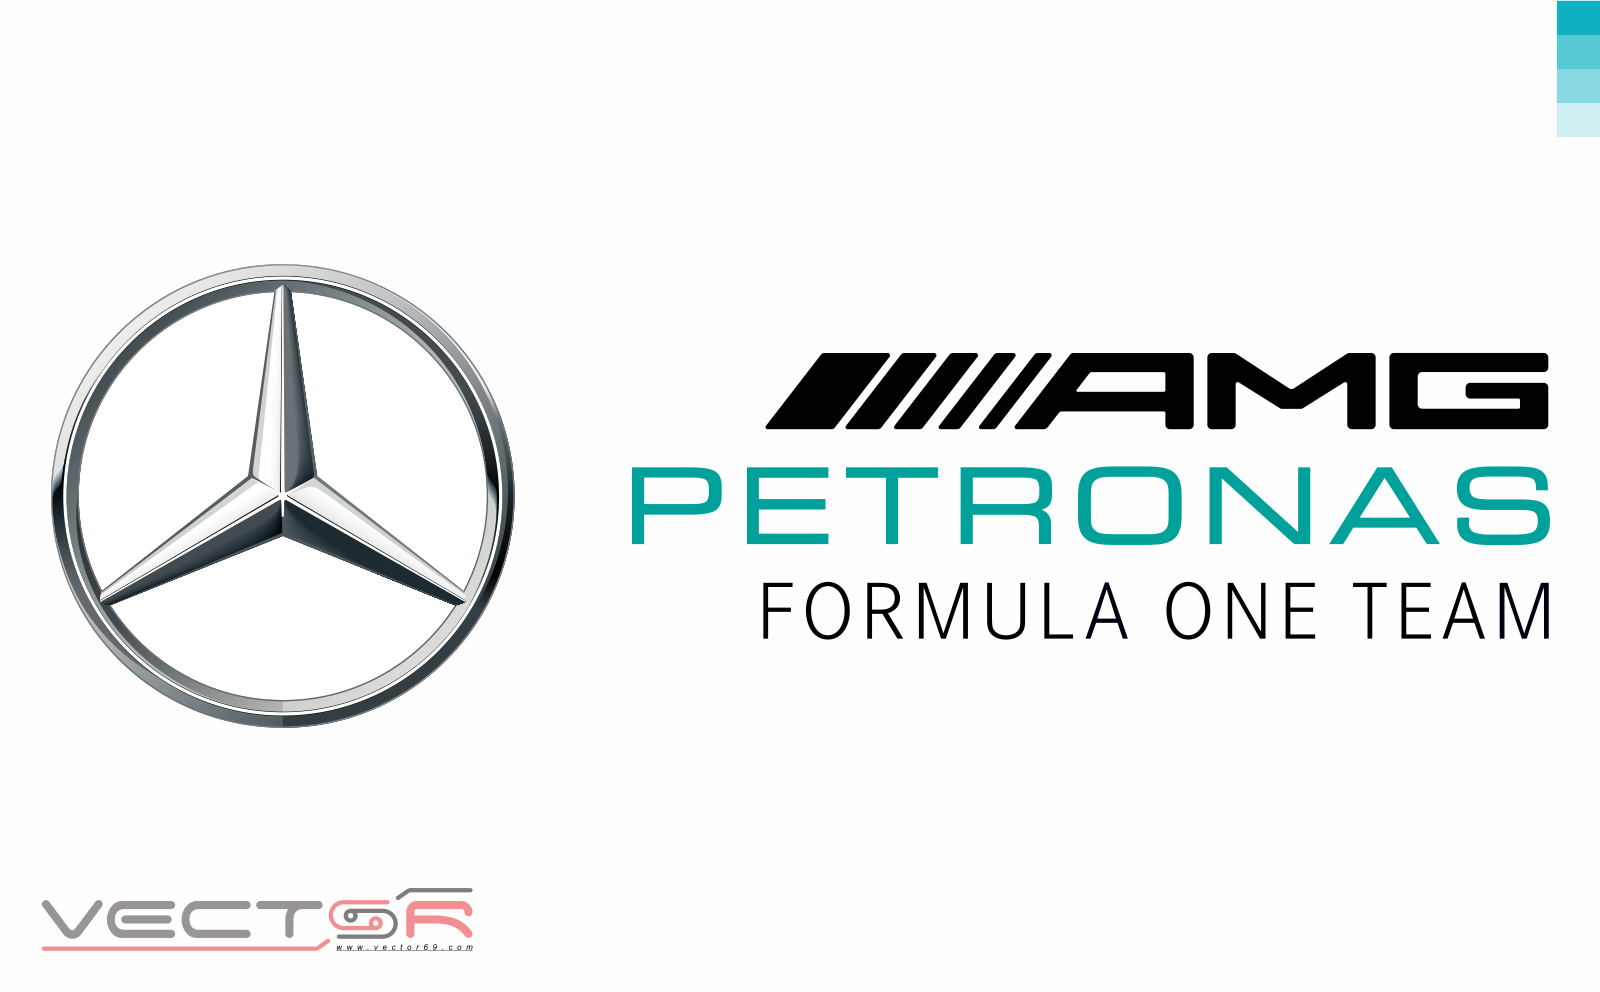 Mercedes-AMG Petronas F1 Team Logo - Download Vector File SVG (Scalable Vector Graphics)